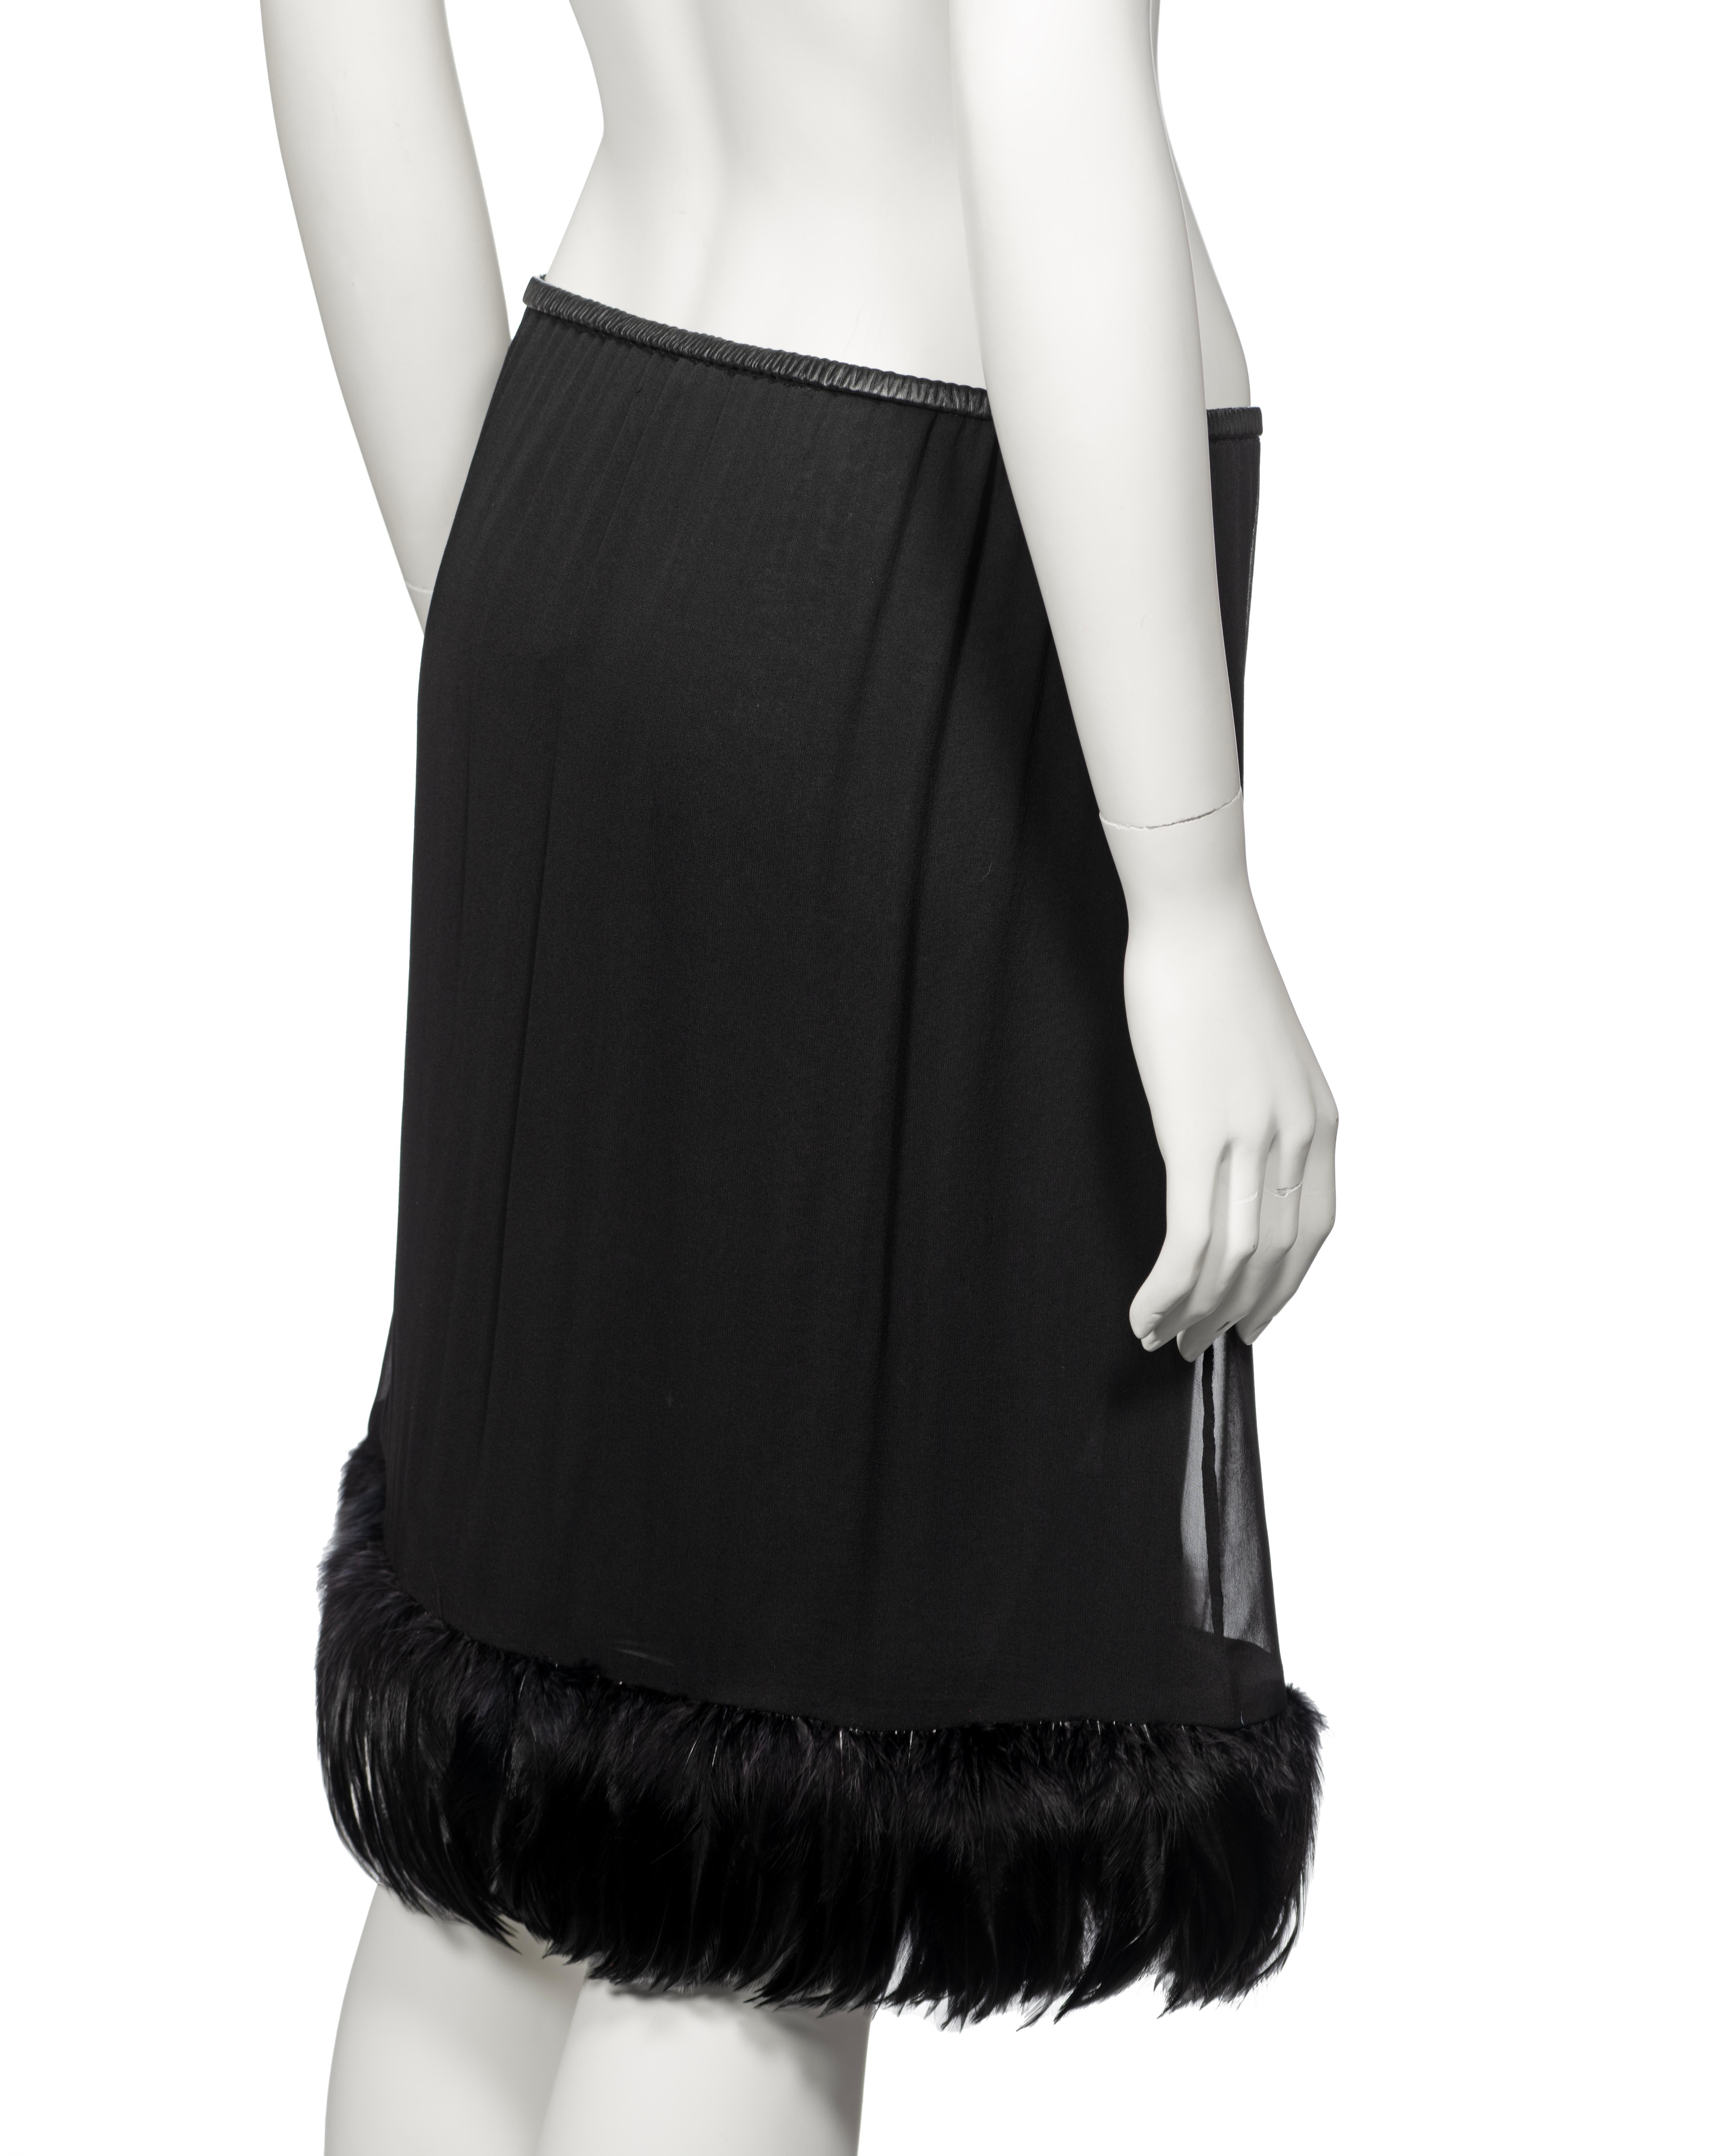 Gucci by Tom Ford Black Silk Evening Skirt With Feathers, ss 1999 For Sale 5